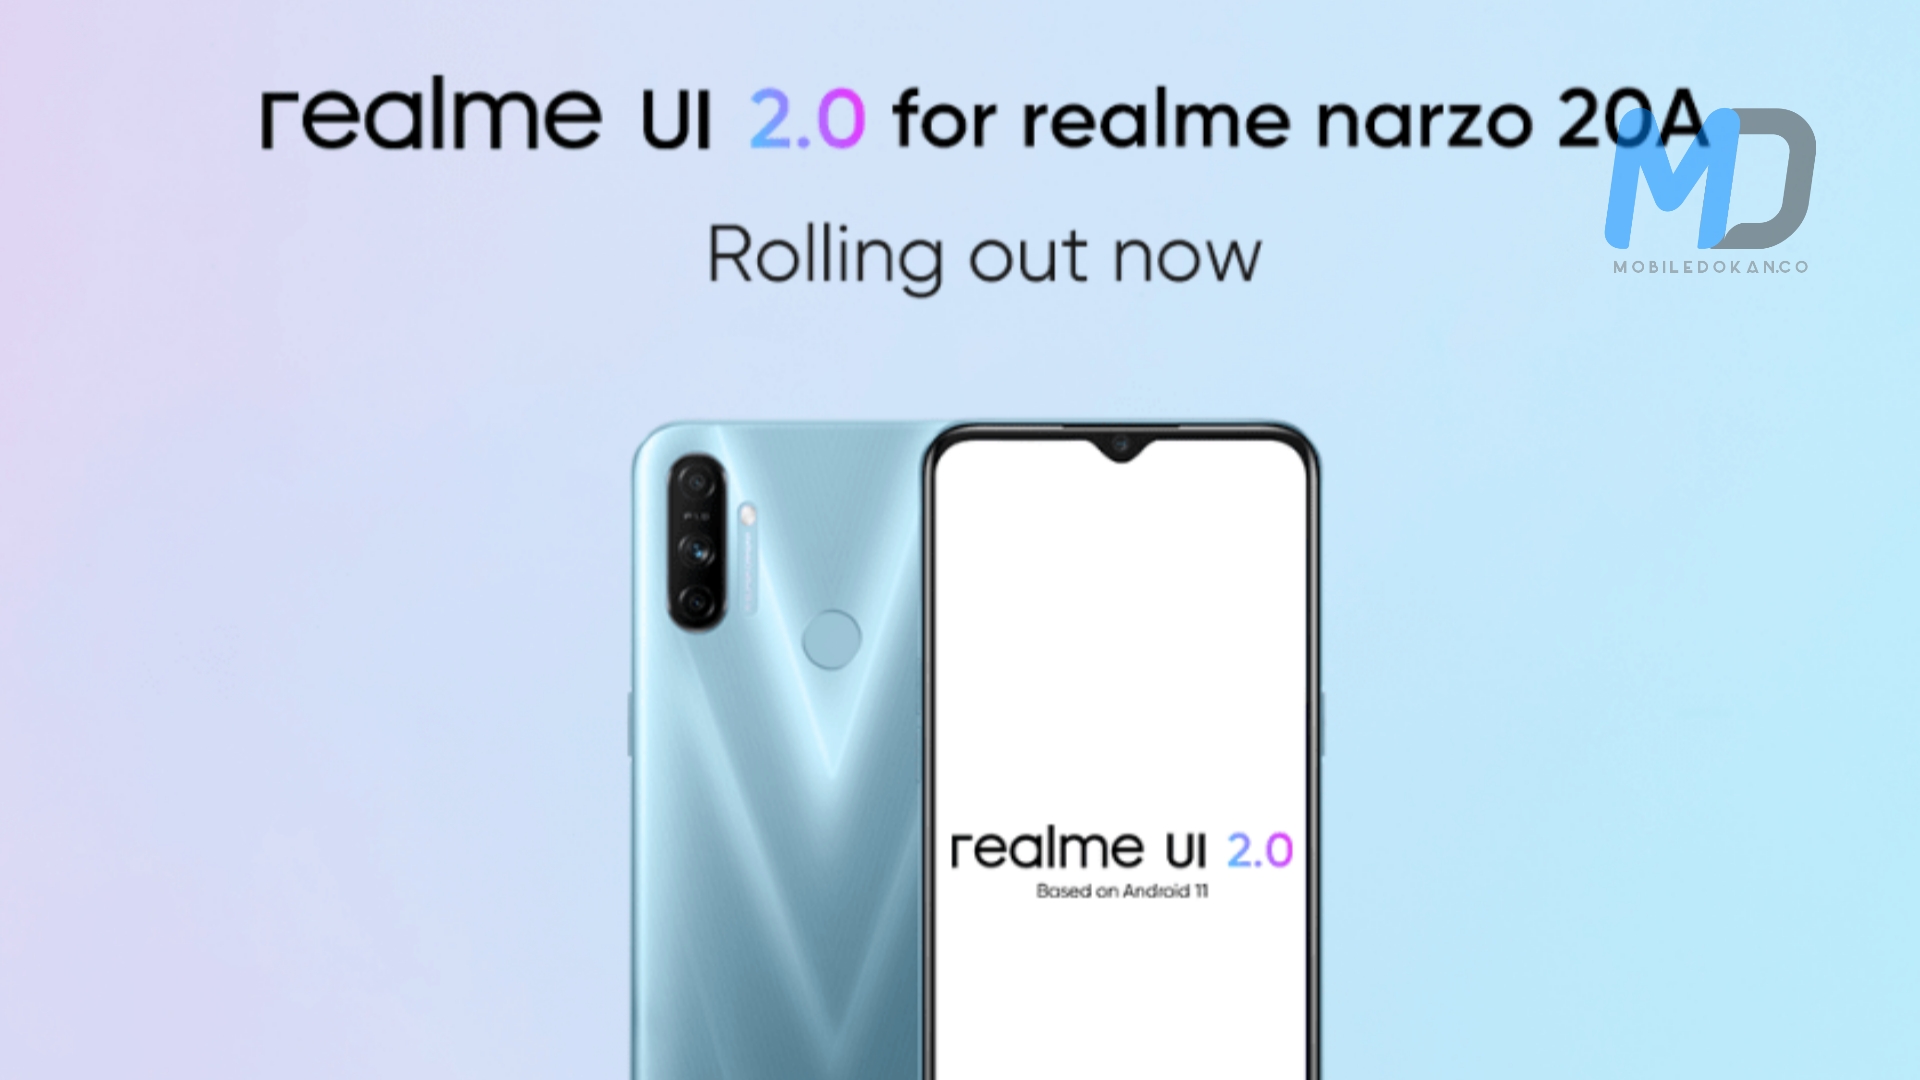 Realme narzo 20A gets Android 11-based realme UI 2.0 update